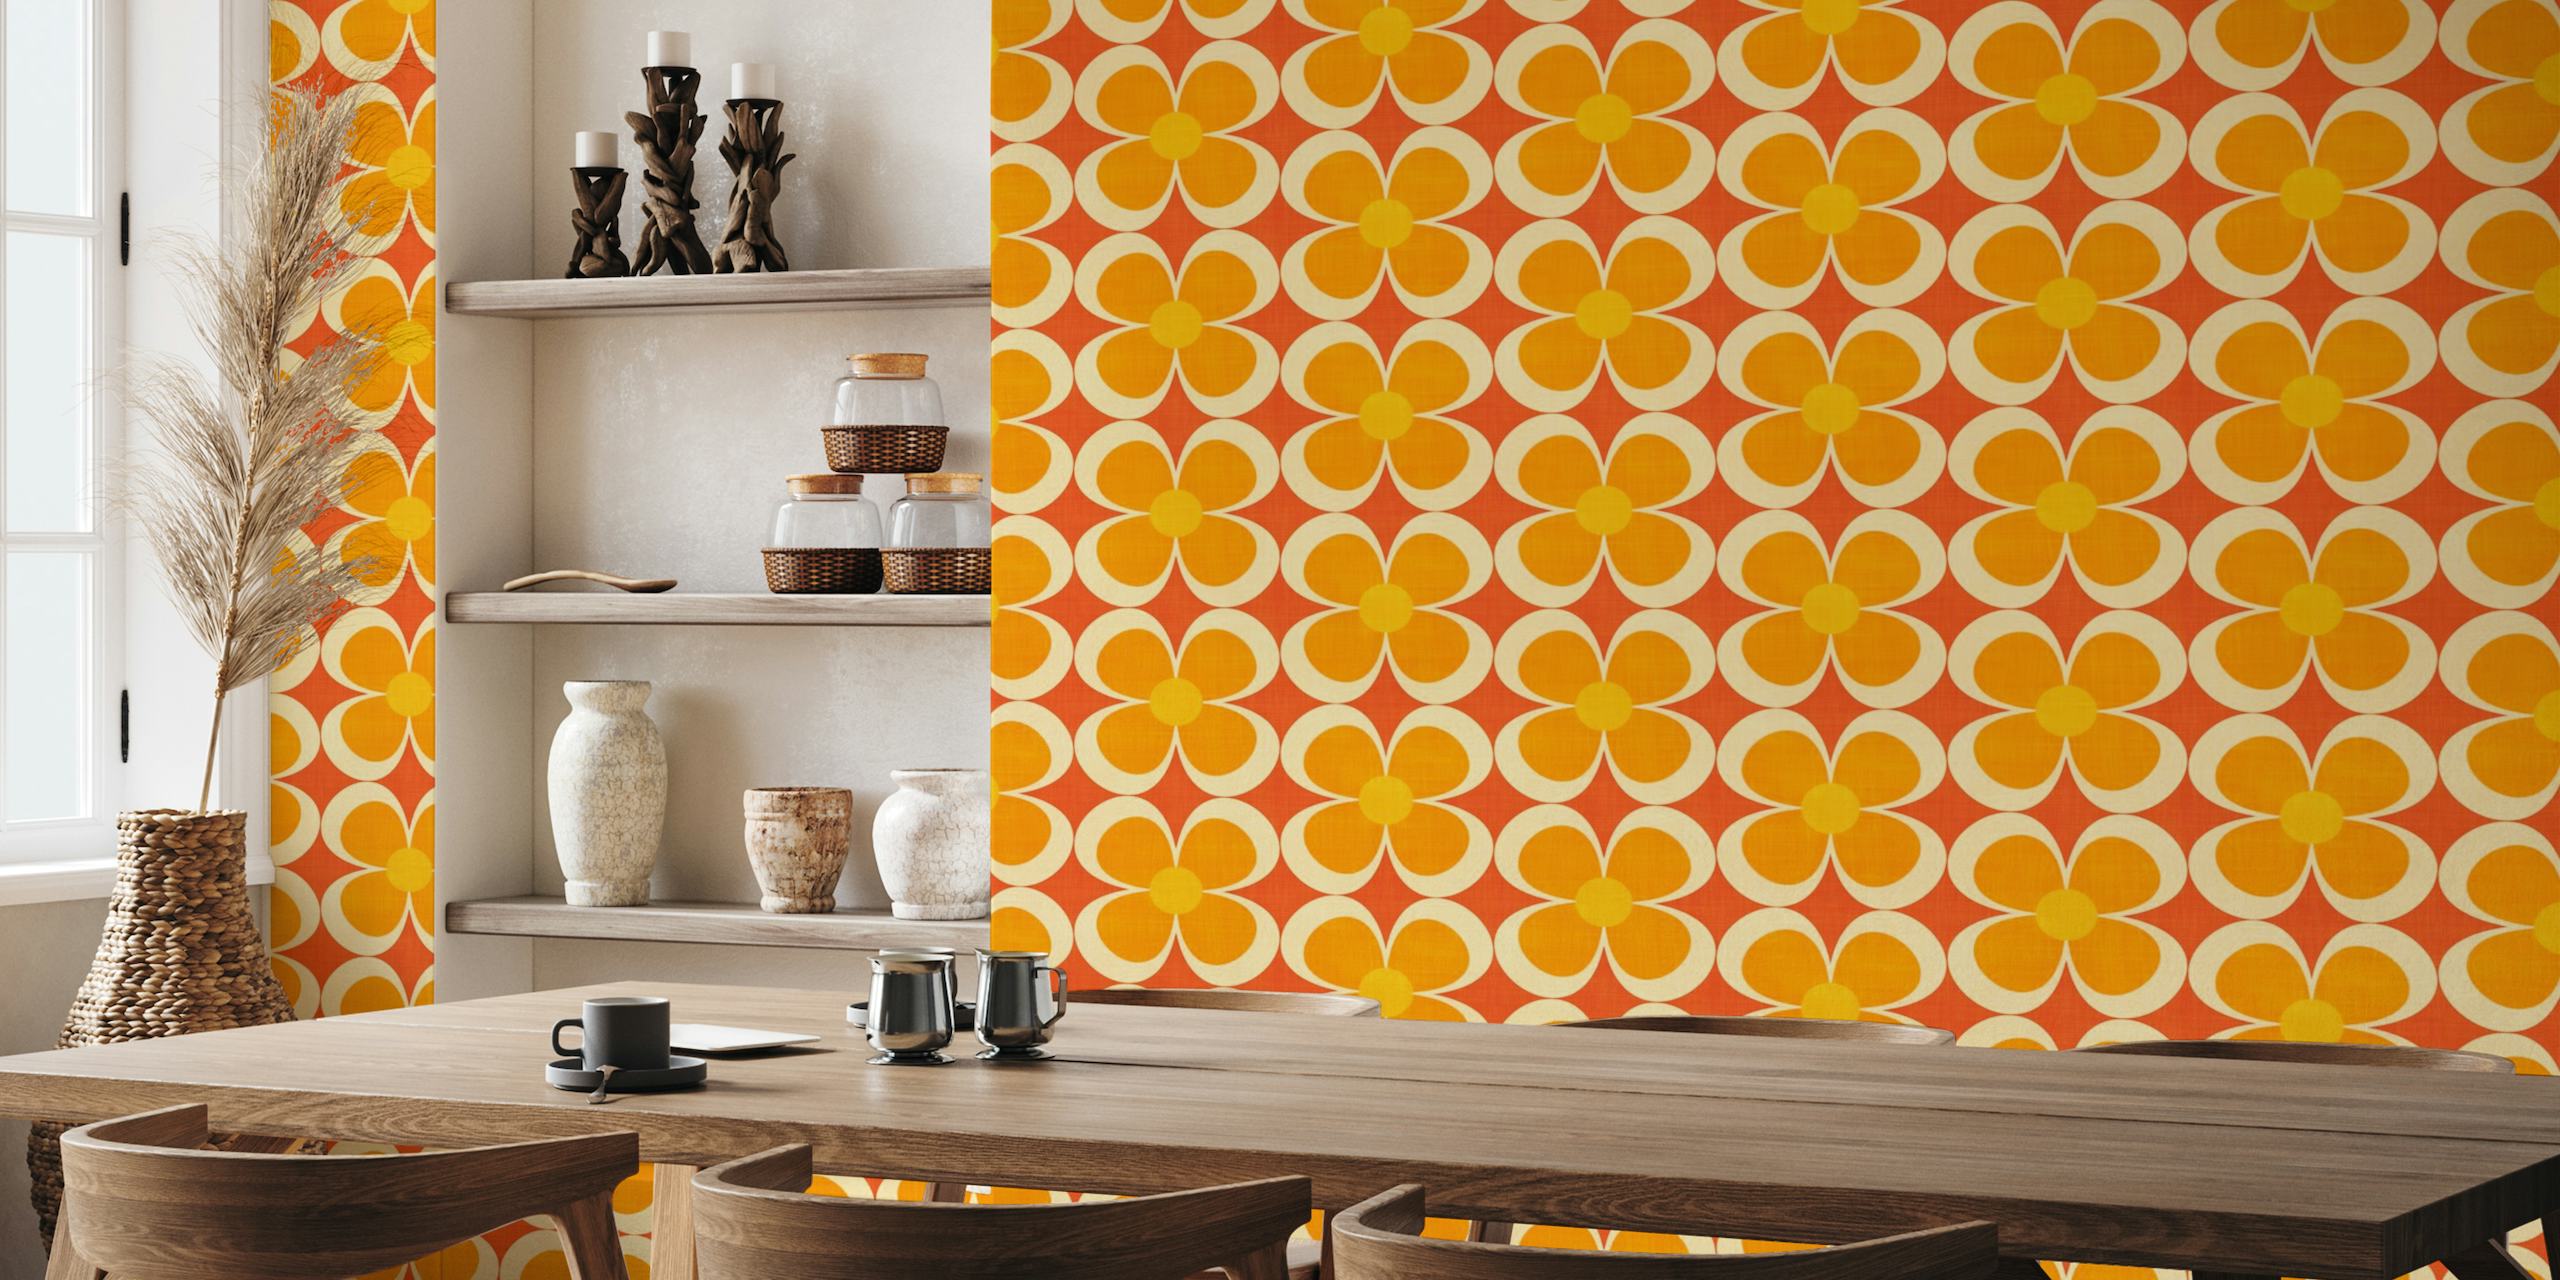 Groovy Geometric Floral Orange Red Small tapete